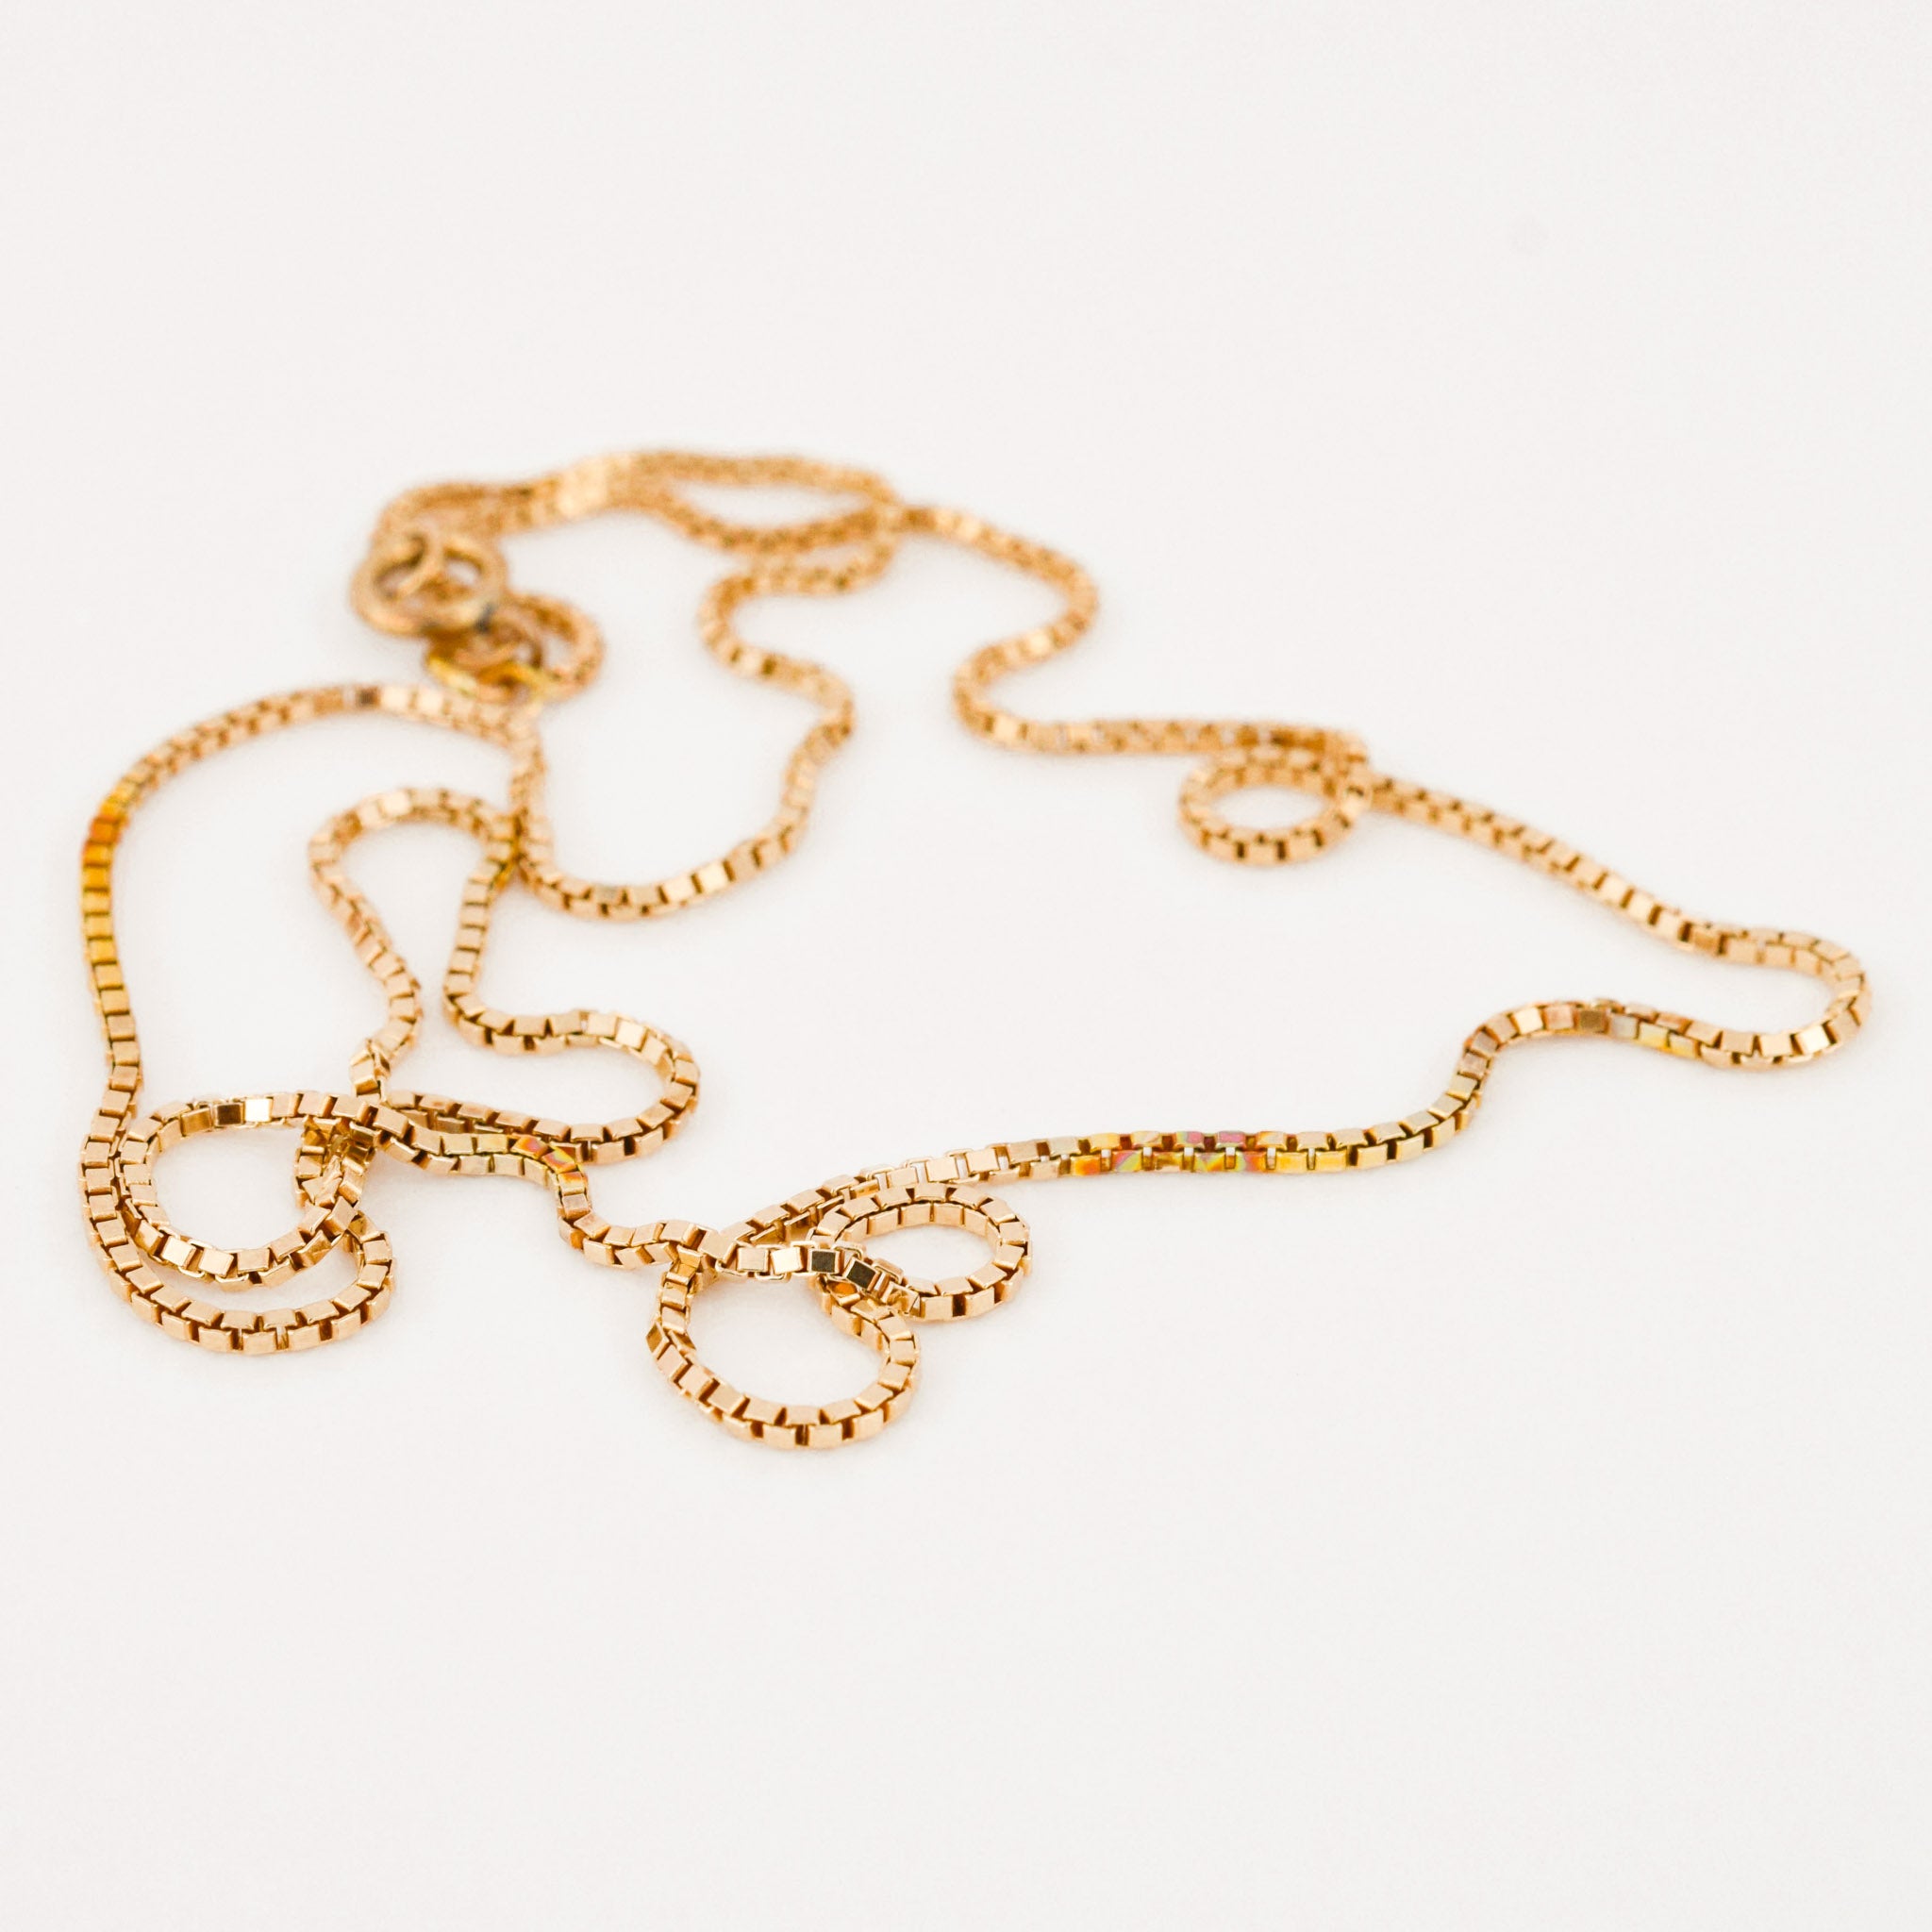 vintage gold box chain necklacevintage gold box chain necklace